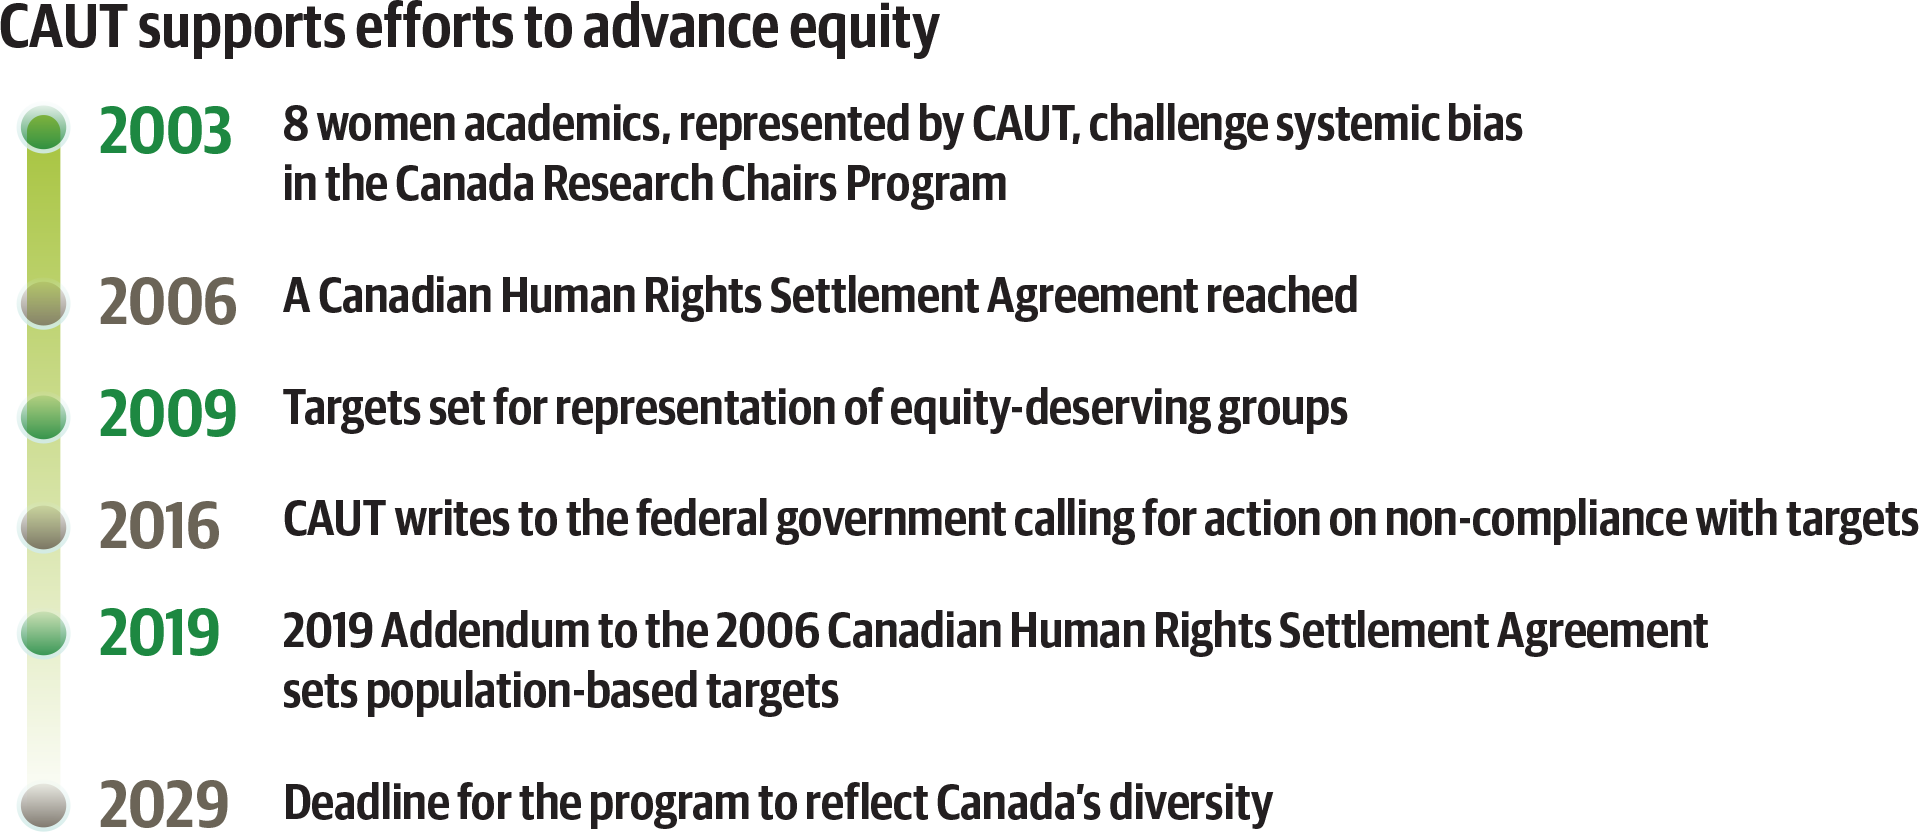 2003 8 women academics, represented by CAUT, challenge systemic bias in the Canada Research Chairs Program, 2006 A Canadian Human Rights Settlement Agreement reached, 2009 Targets set for representation of equity-deserving groups, 2016 CAUT writes to the federal government calling for action on non-compliance with targets, 2019 2019 Addendum to the 2006 Canadian Human Rights Settlement  Agreement sets population-based targets, 2029 Deadline for the program to reflect Canada’s diversity